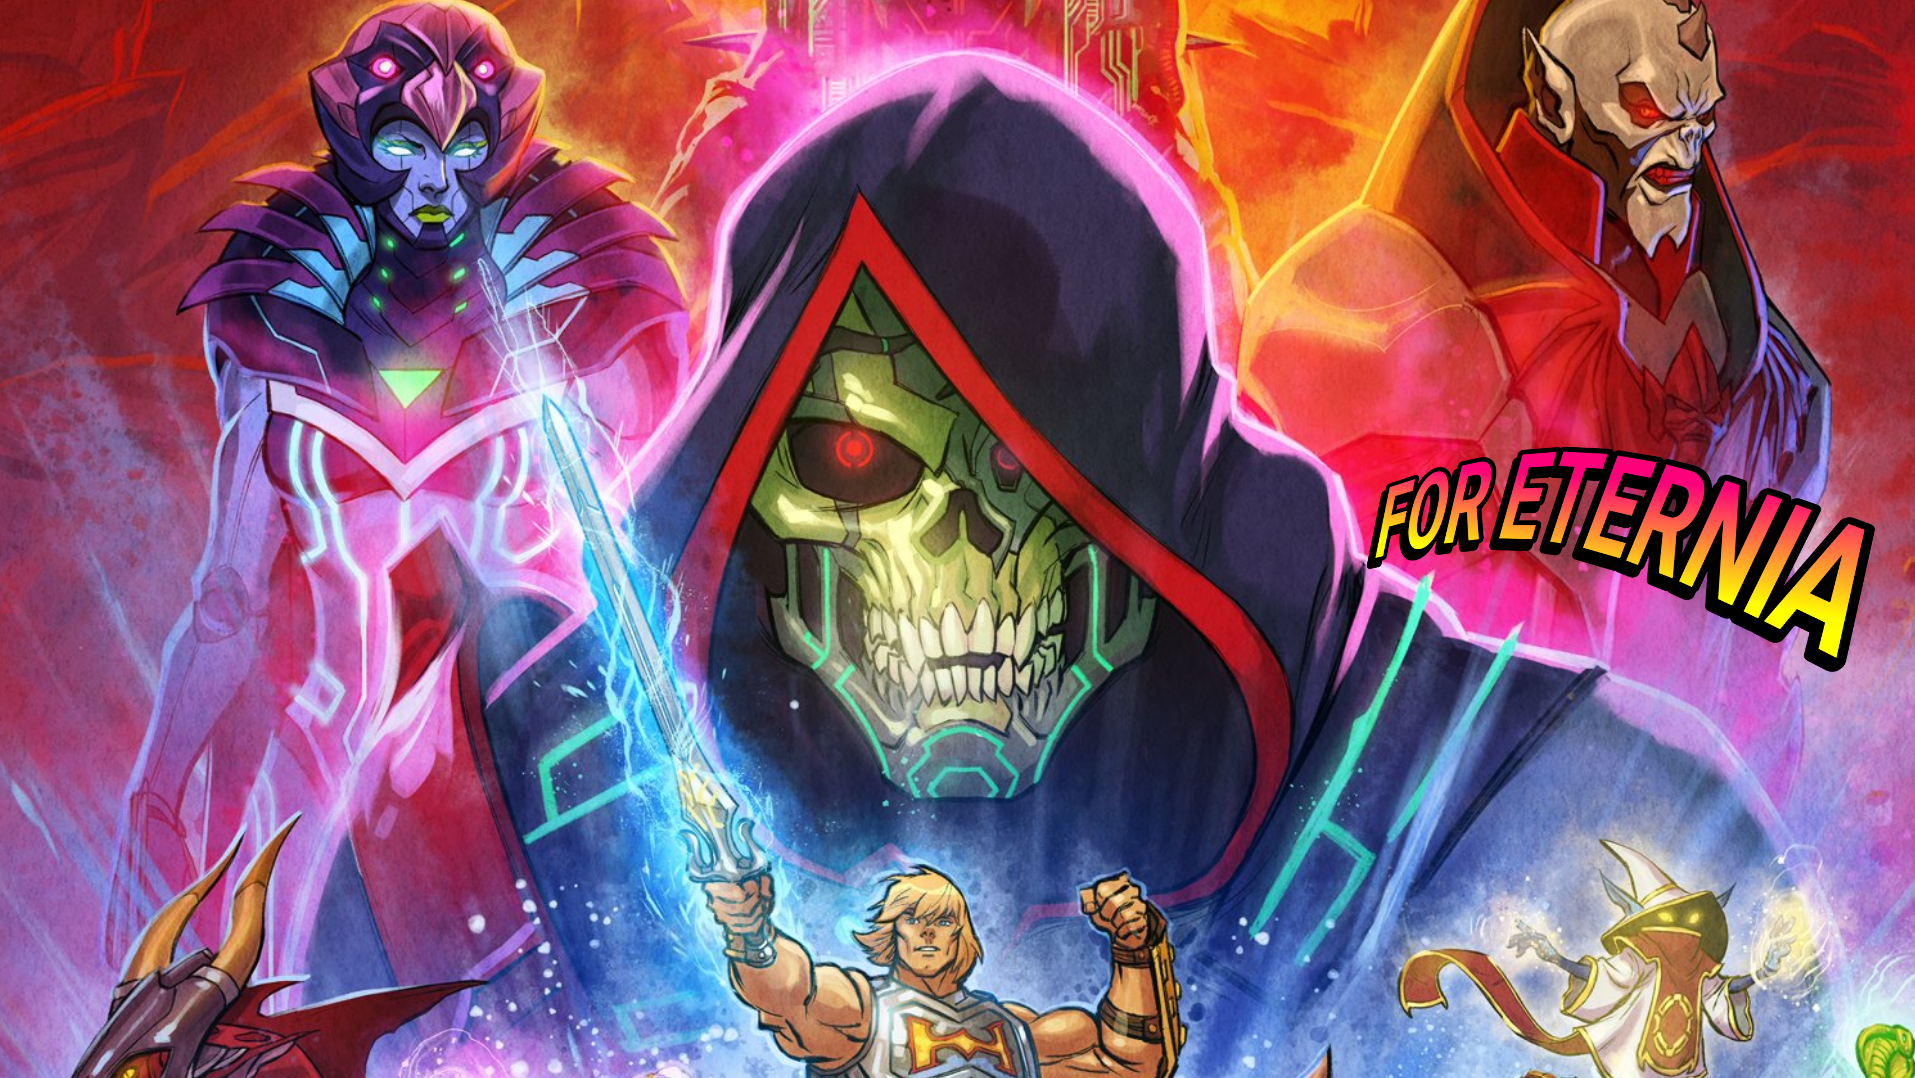 The Official Poster for ”Masters of the Universe: Revolution” has been Revealed! (trailer comes tomorrow)